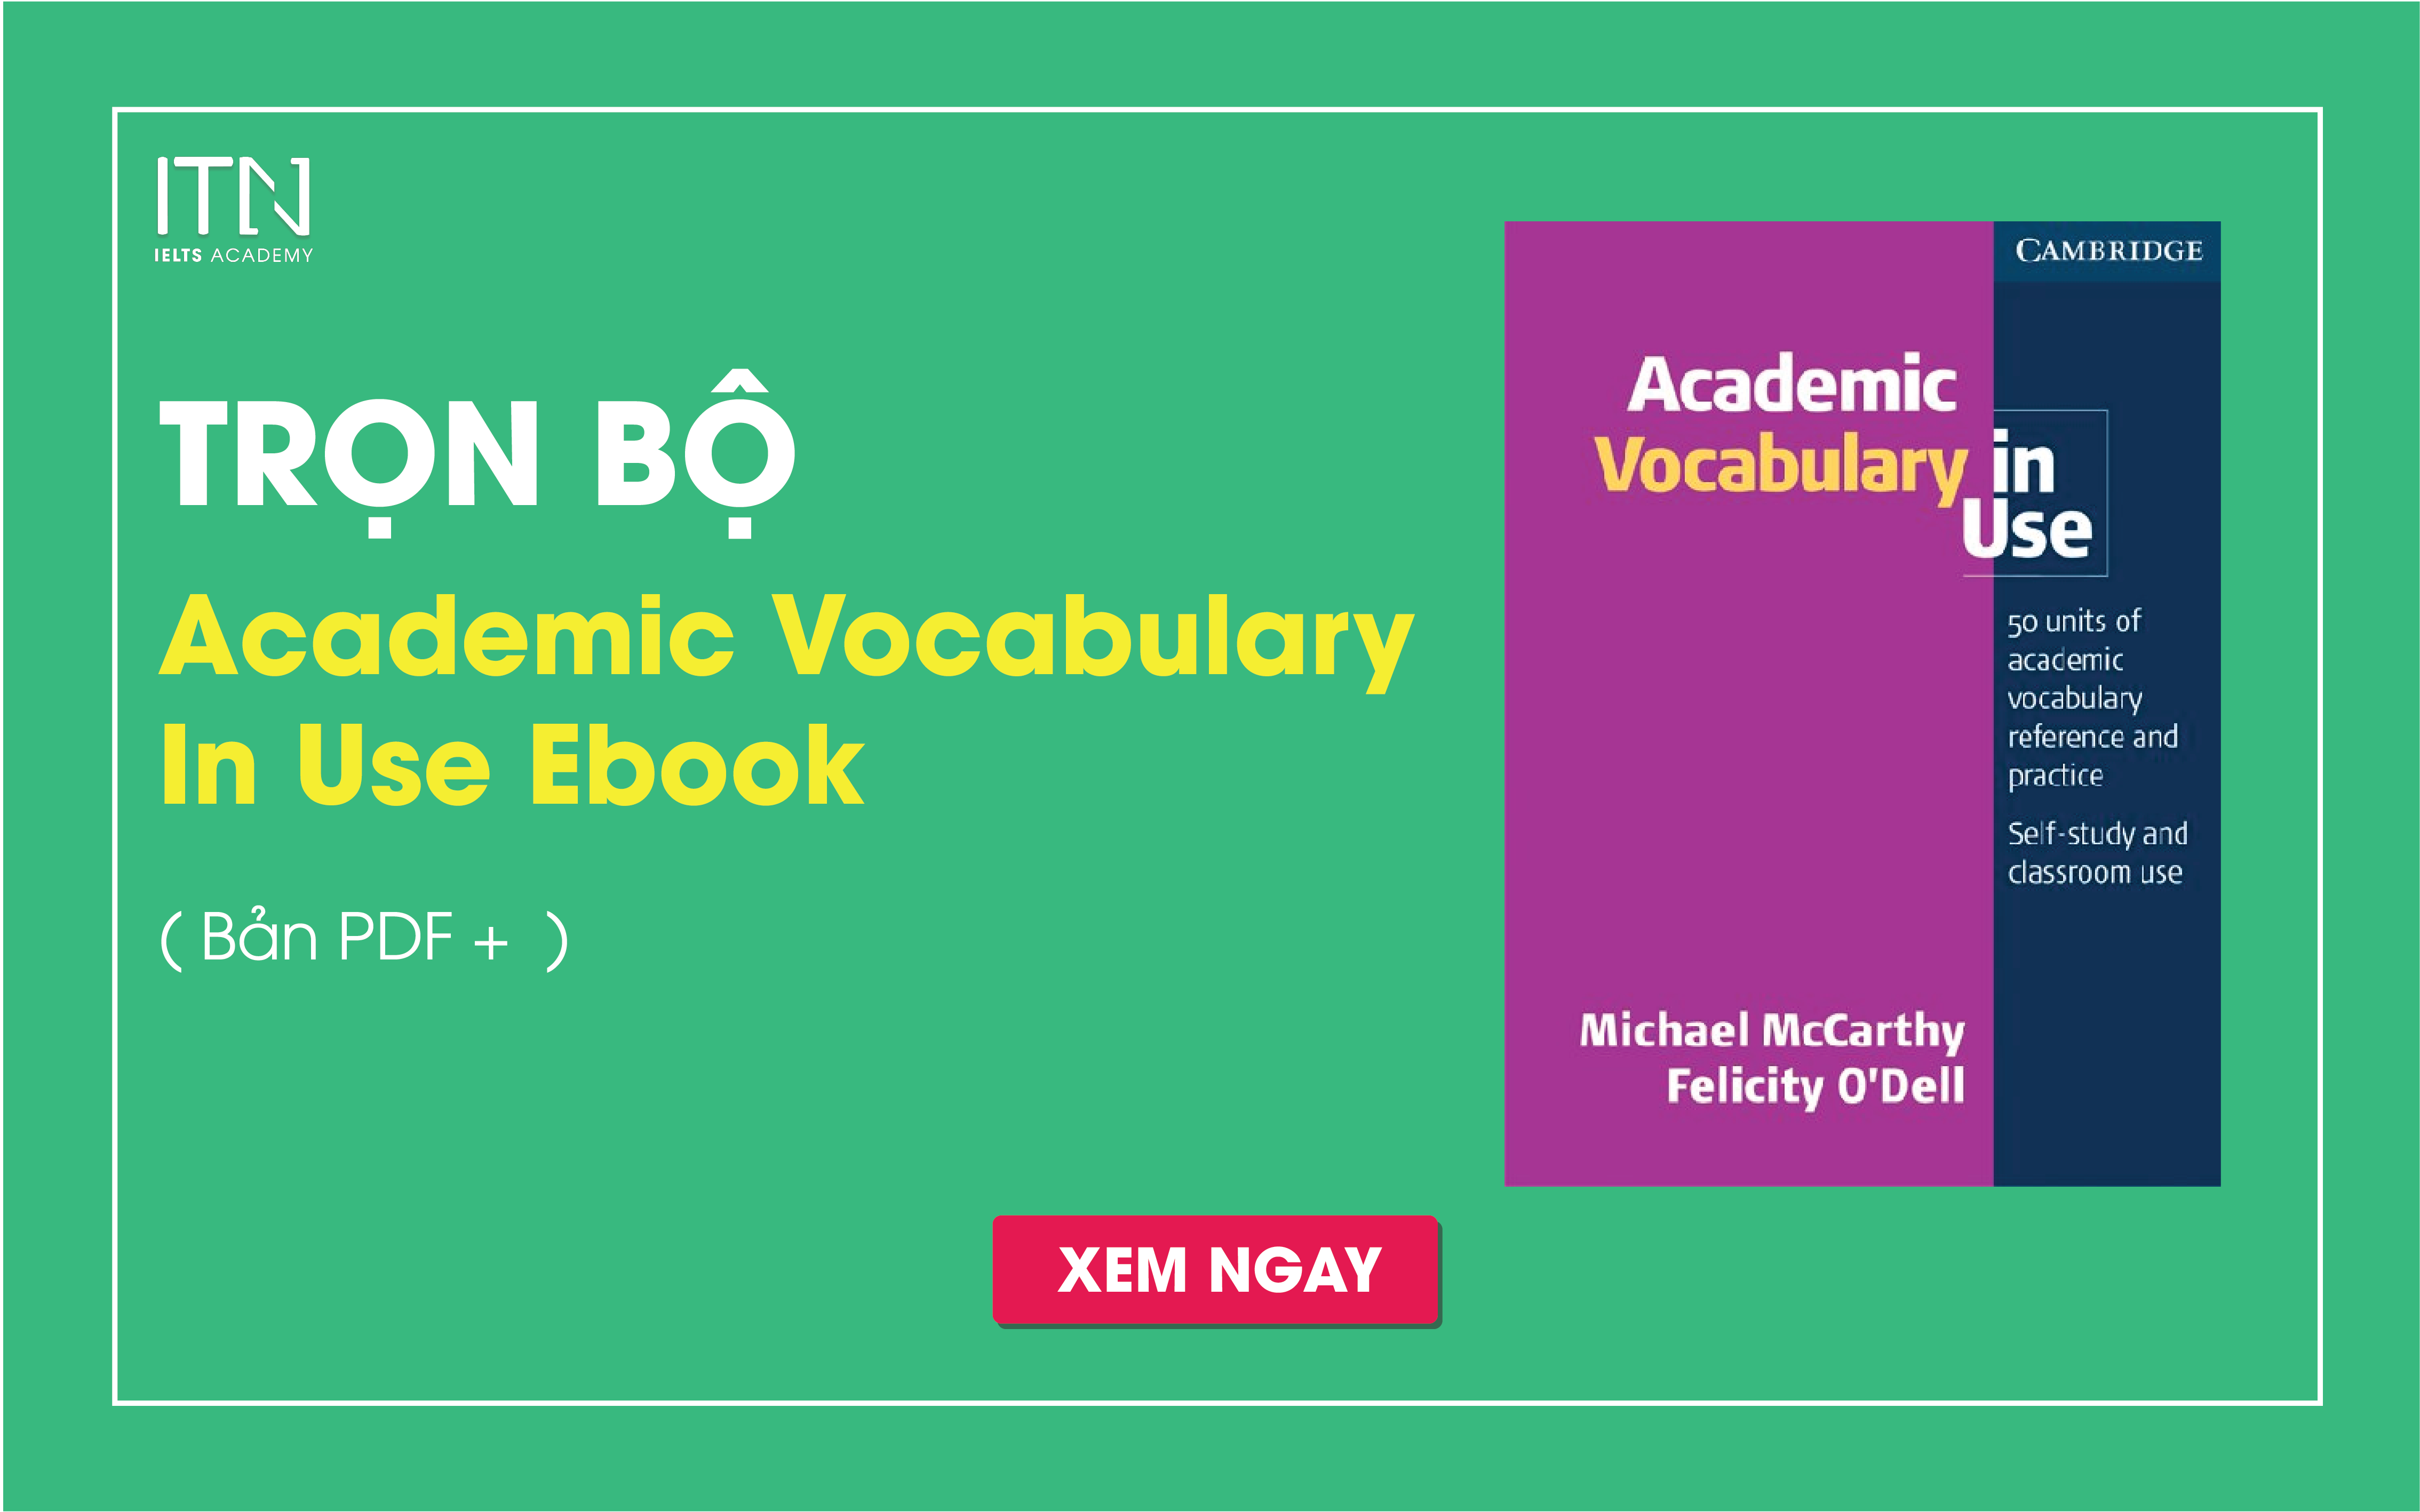 academic vocabulary in use